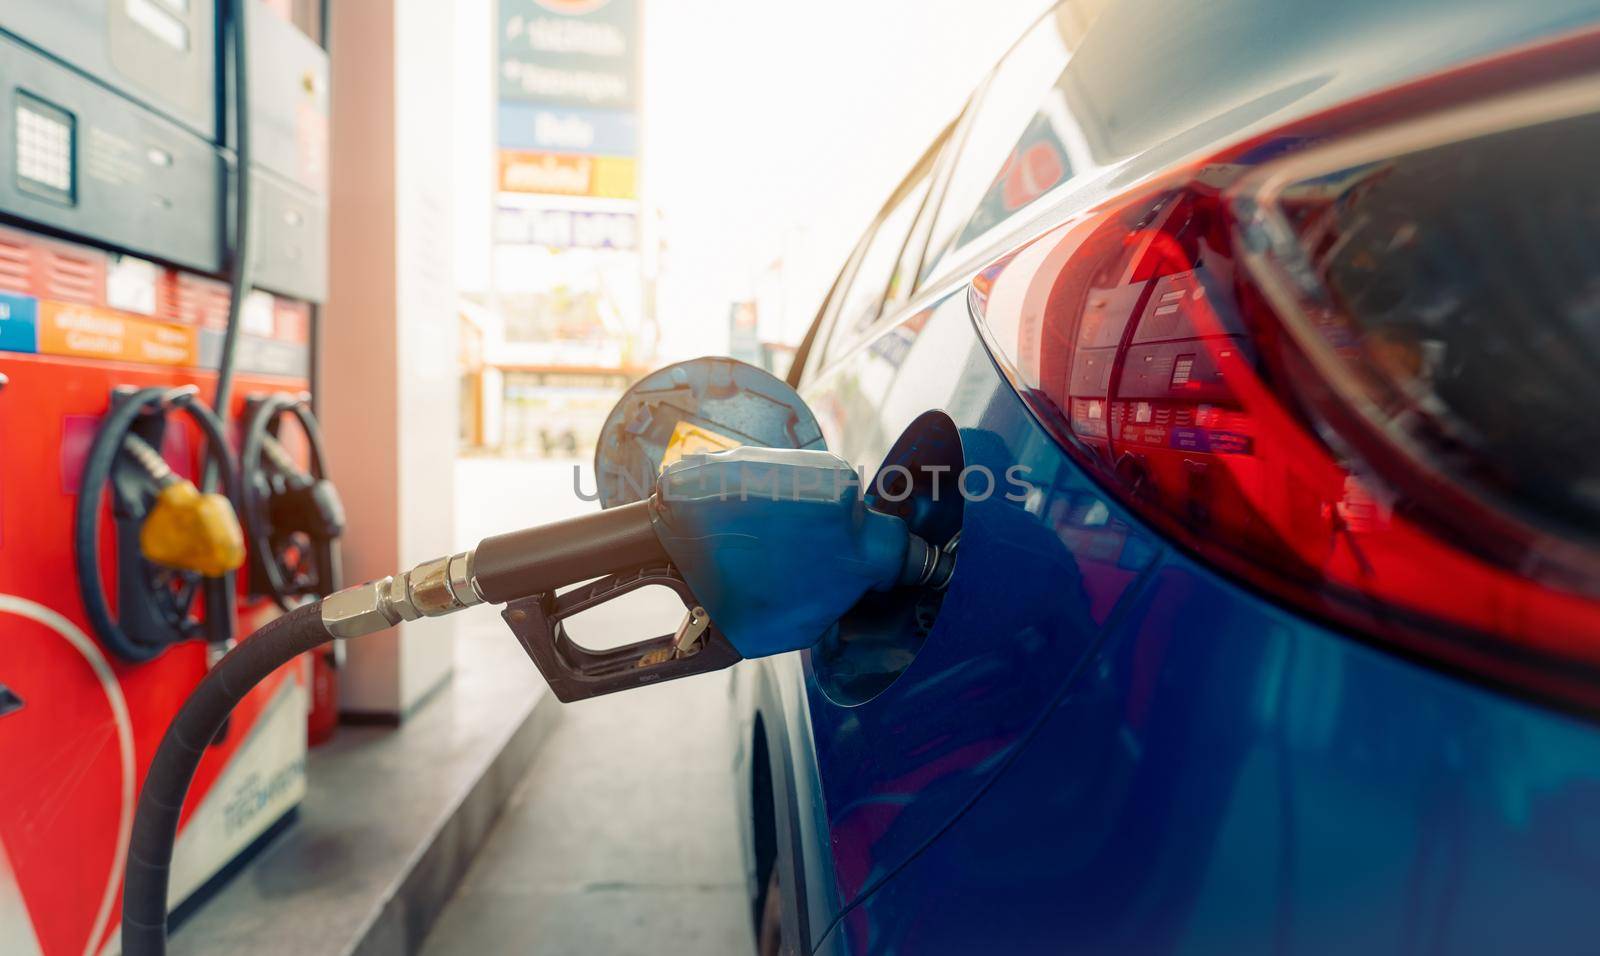 Car fueling at gas station. Refuel fill up with petrol gasoline. Petrol pump filling fuel nozzle in fuel tank of car at gas station. Petrol industry and service. Petrol price and oil crisis concept. by Fahroni